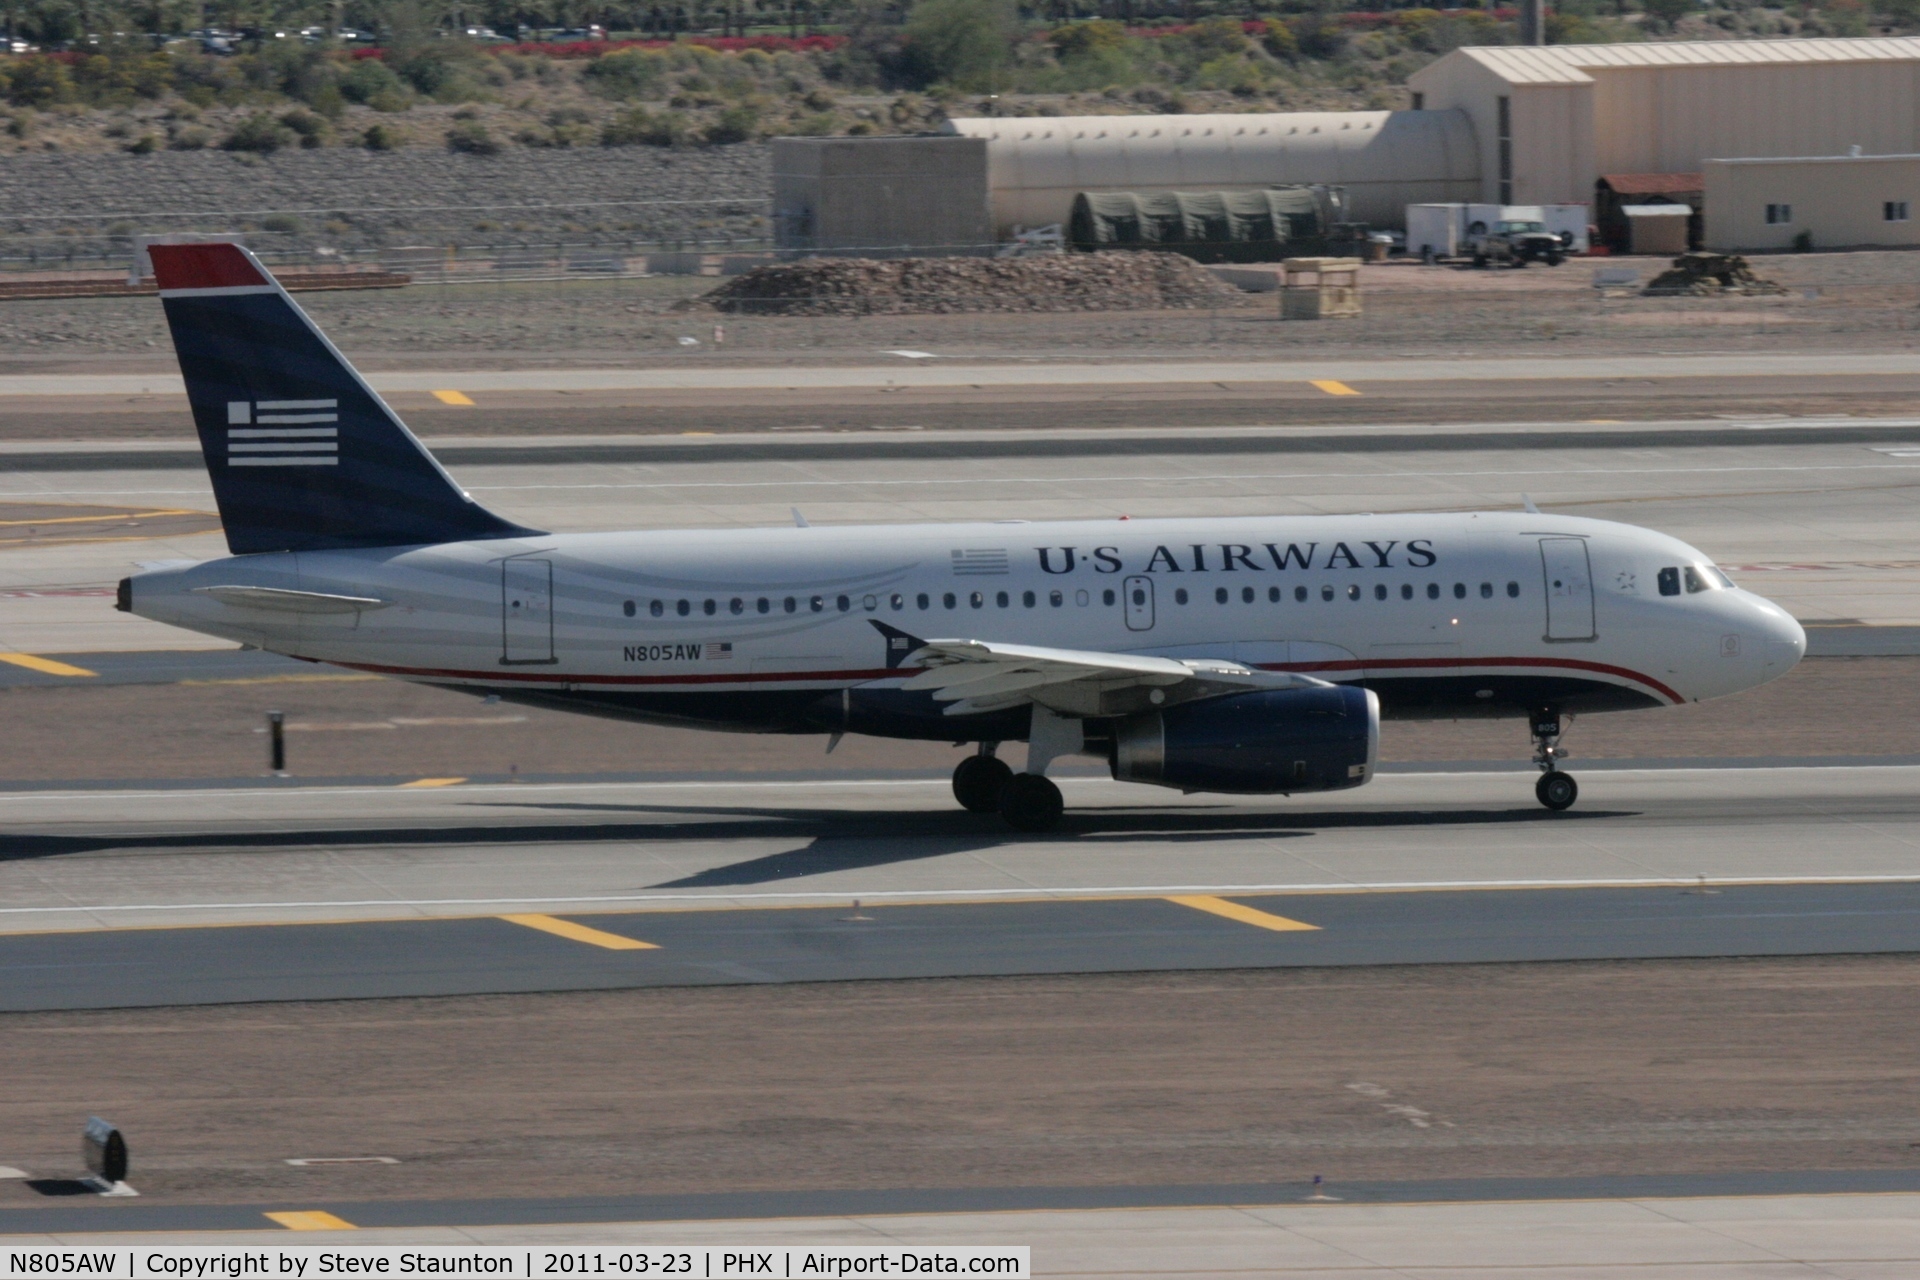 N805AW, 1999 Airbus A319-132 C/N 1049, Taken at Phoenix Sky Harbor Airport, in March 2011 whilst on an Aeroprint Aviation tour